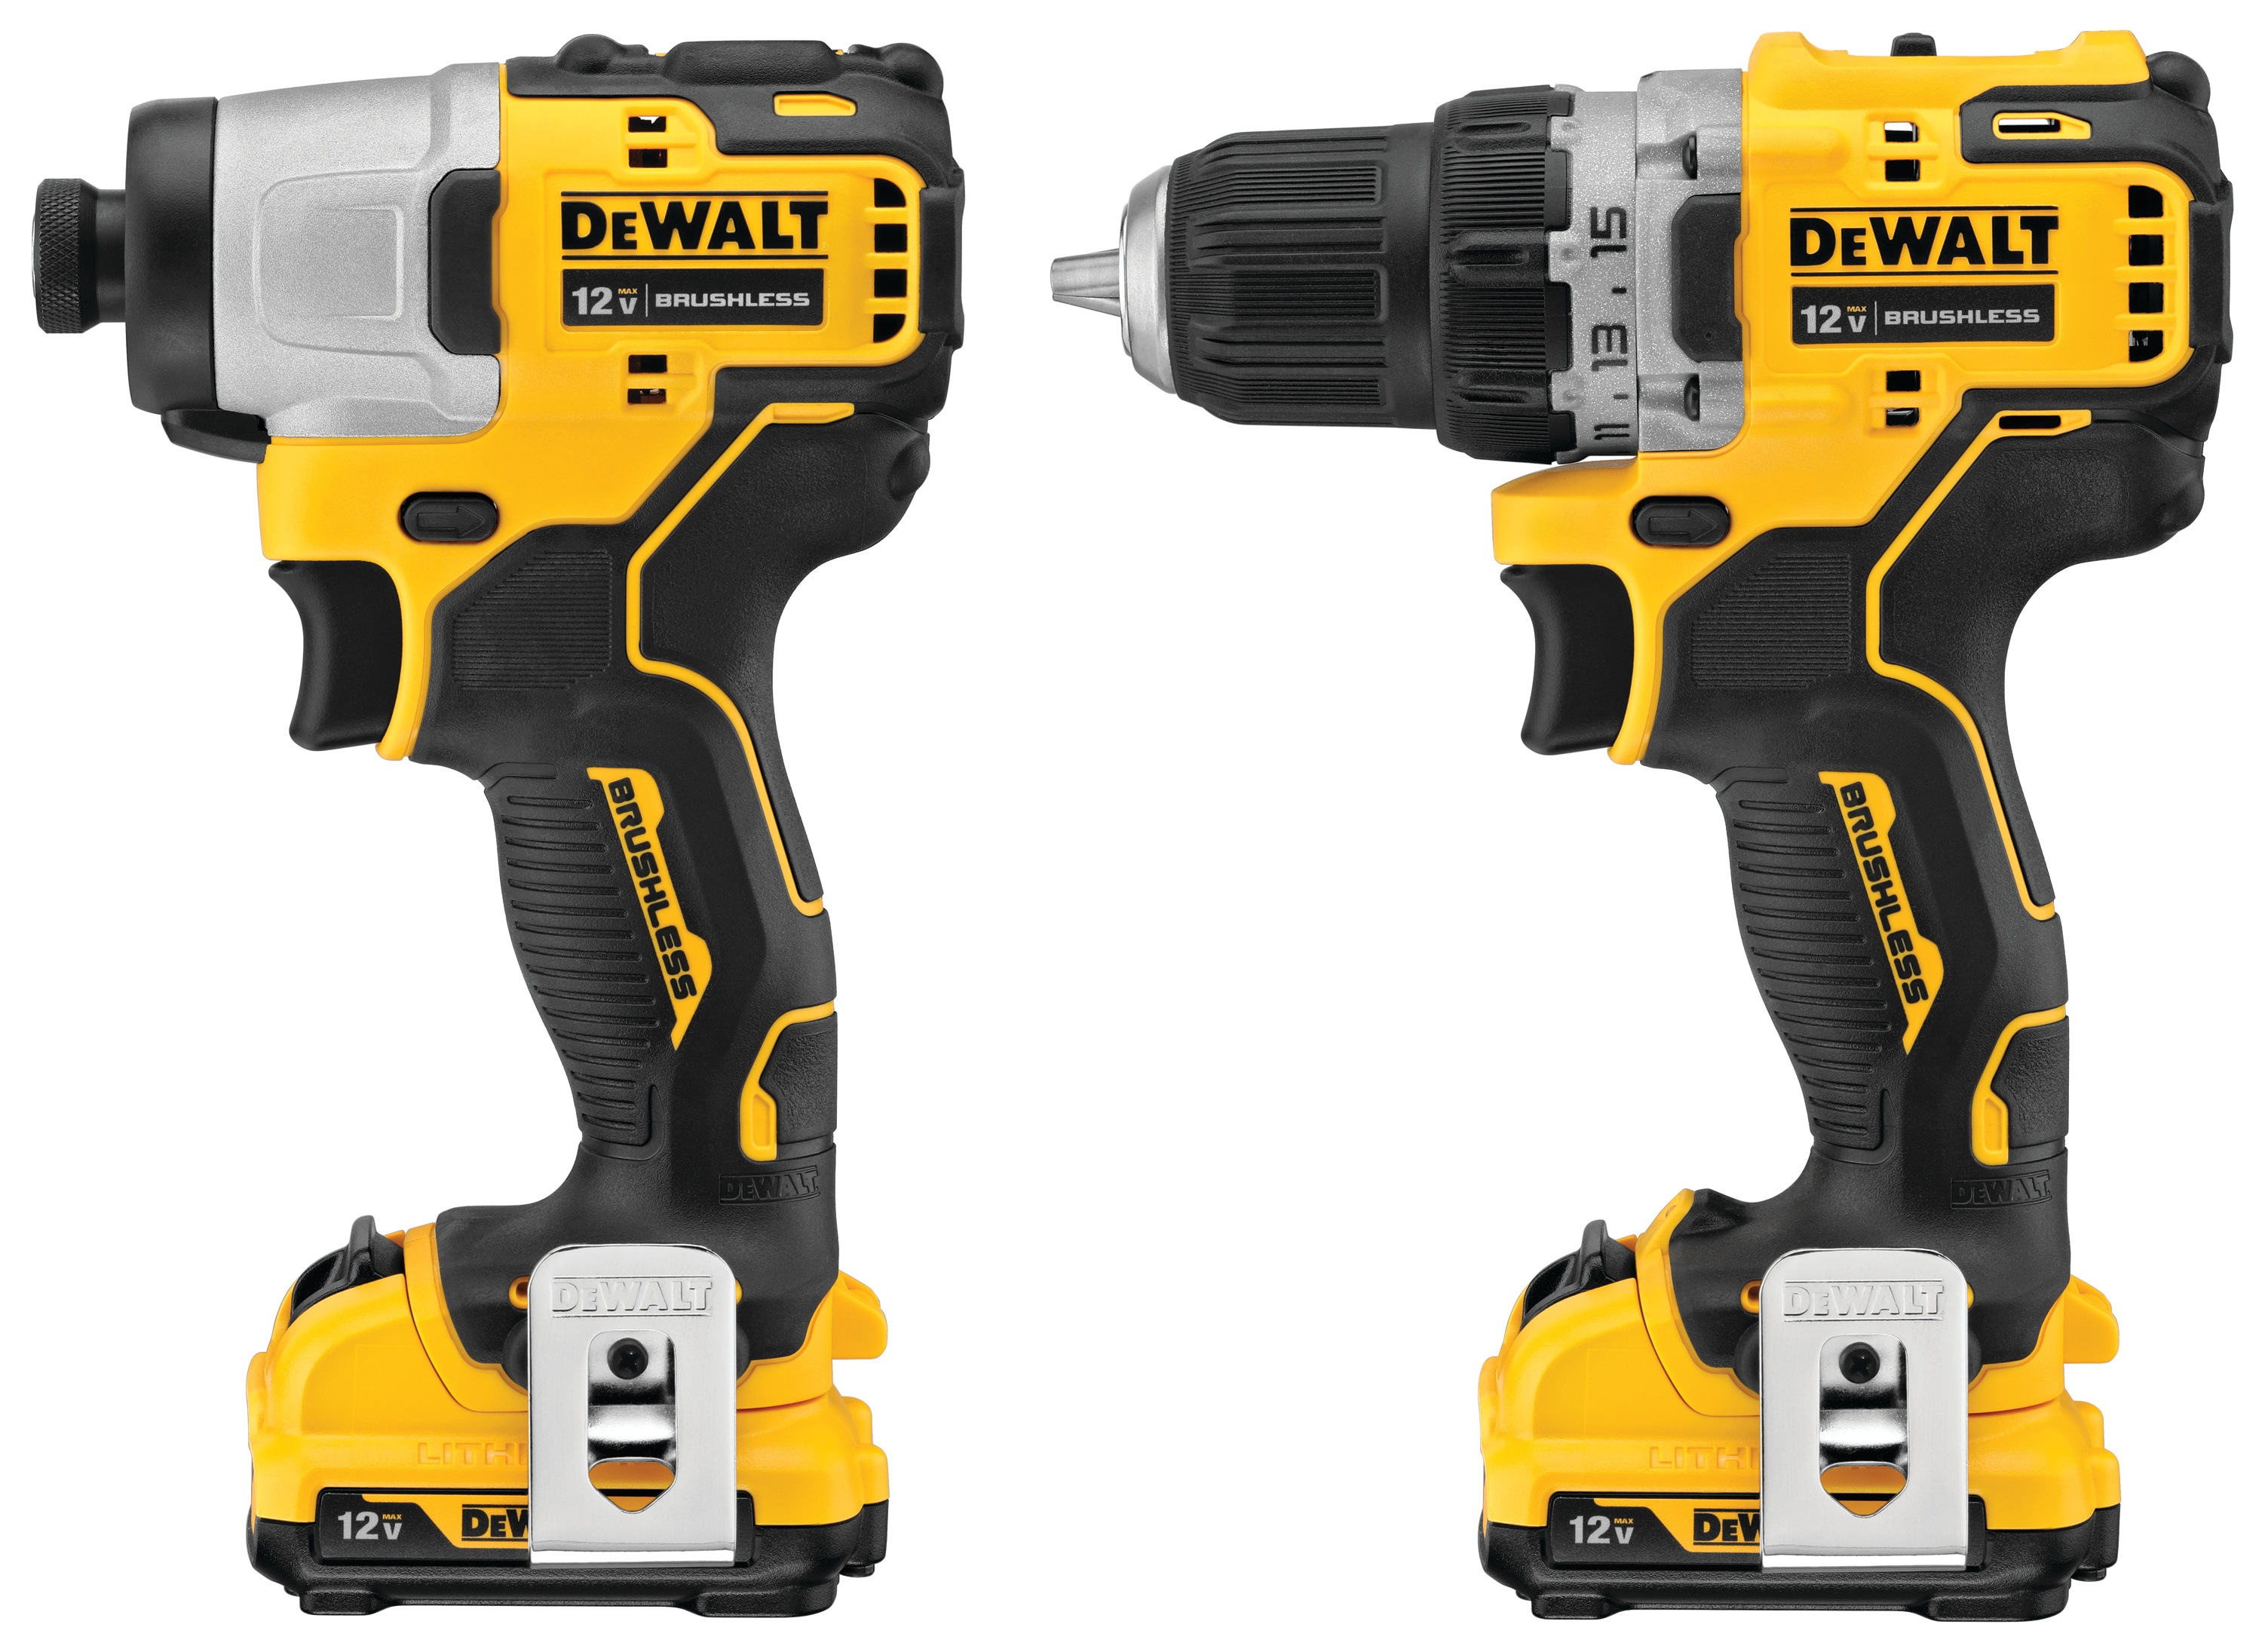 Profiles of Brushless Cordless Drill and Impact Driver